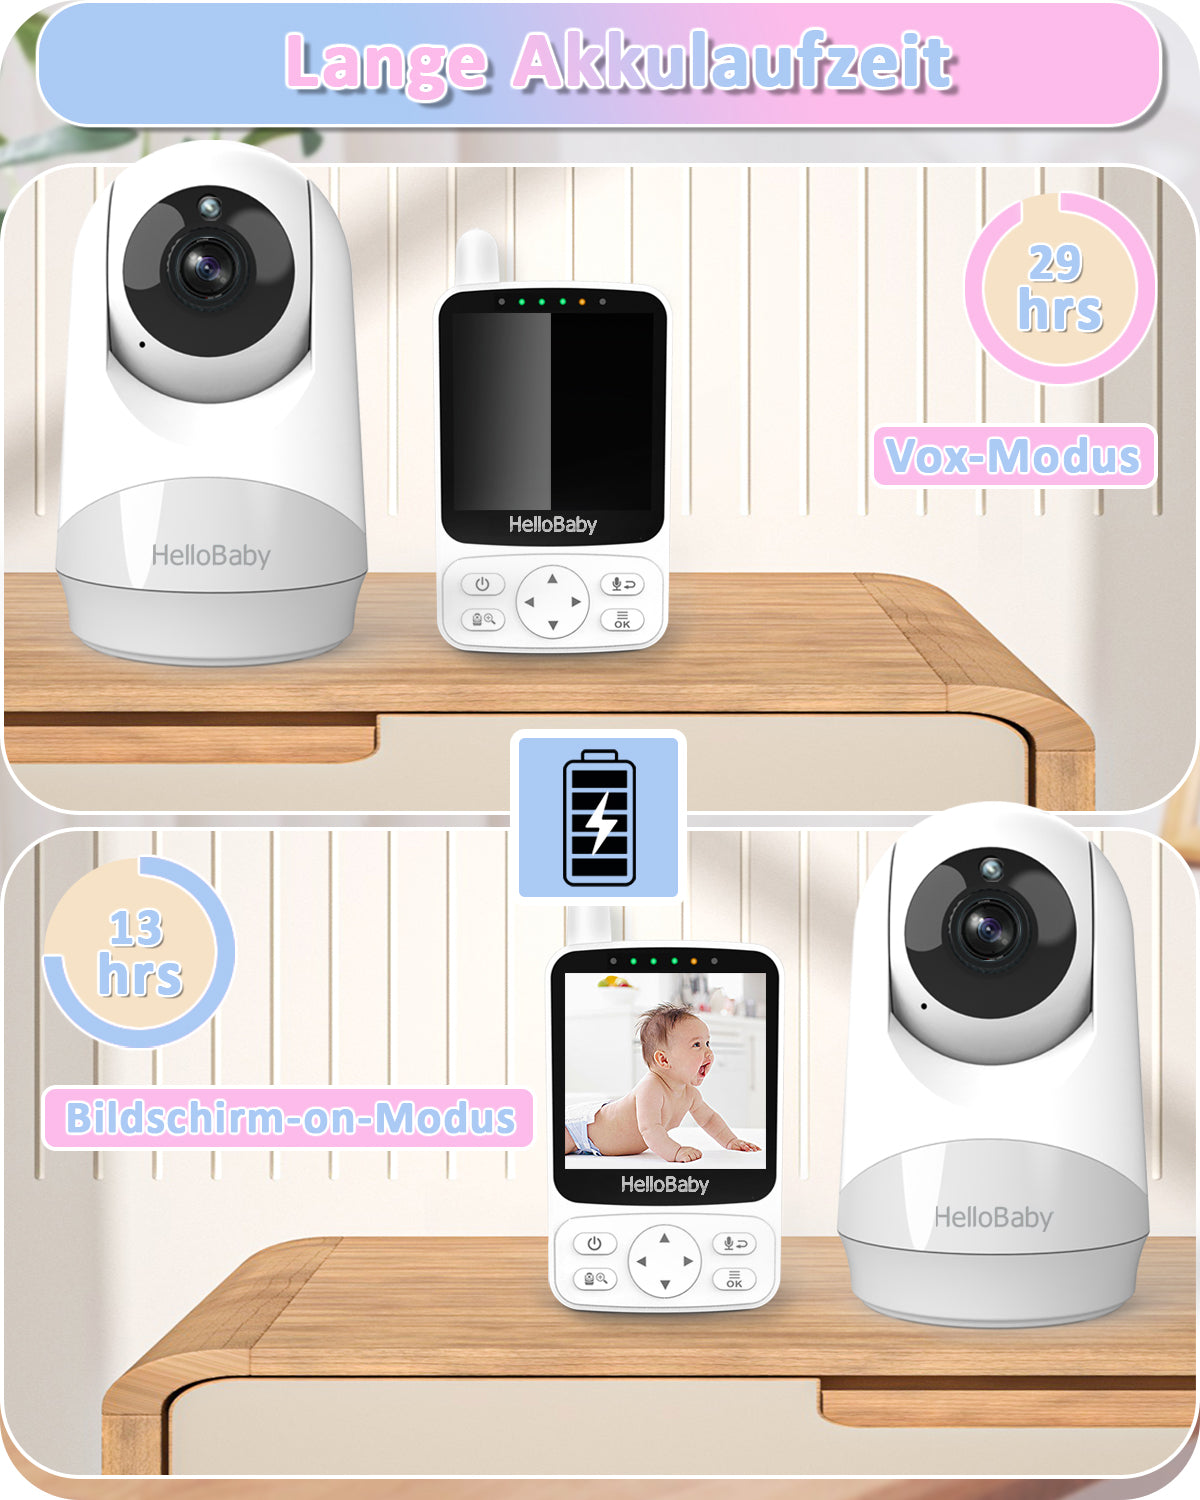  HelloBaby Smart HB30 Monitor, No WiFi, No Apps, Up to